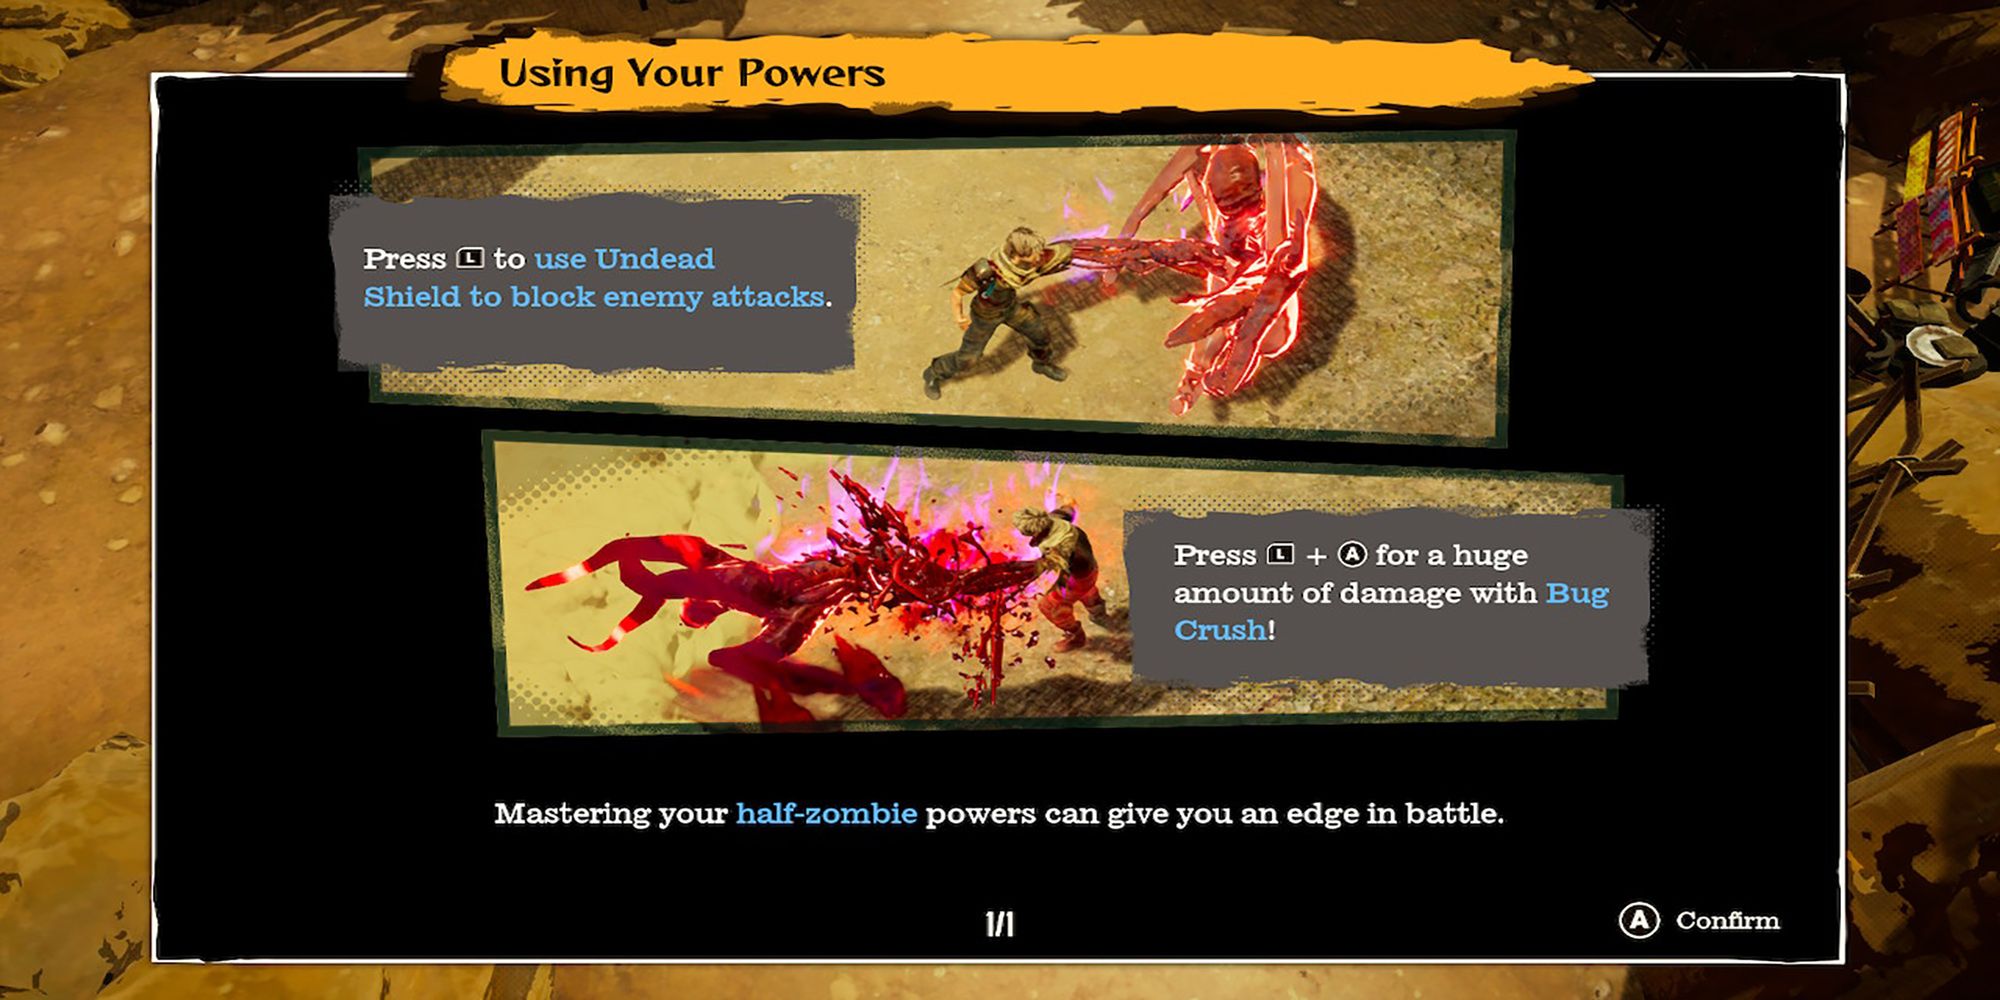 The "Using Your Powers" tutorial explains Reid's Undead Shield and Bug Crush in Deadcraft.